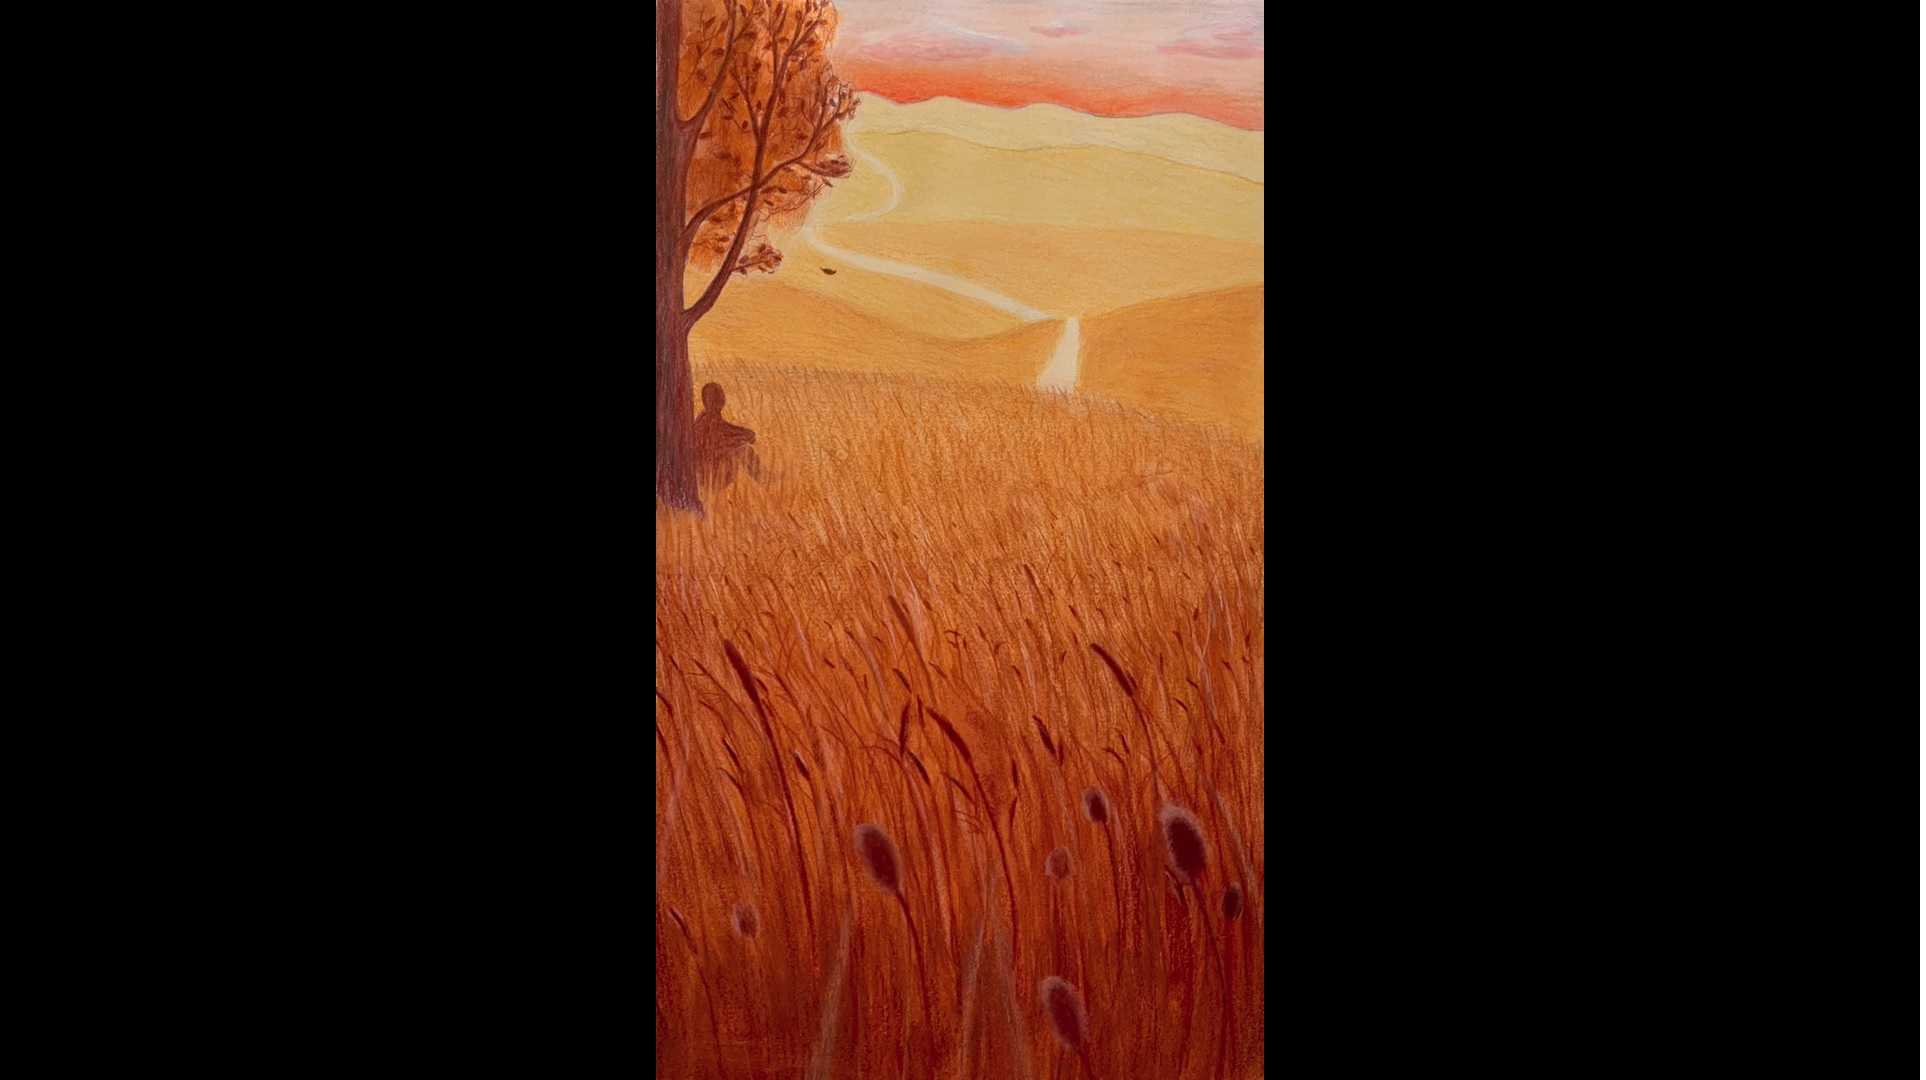 Animation in response to the song ‘in my mind’ by Wallners. Created in the Spotify Canvas format to run alongside the song.